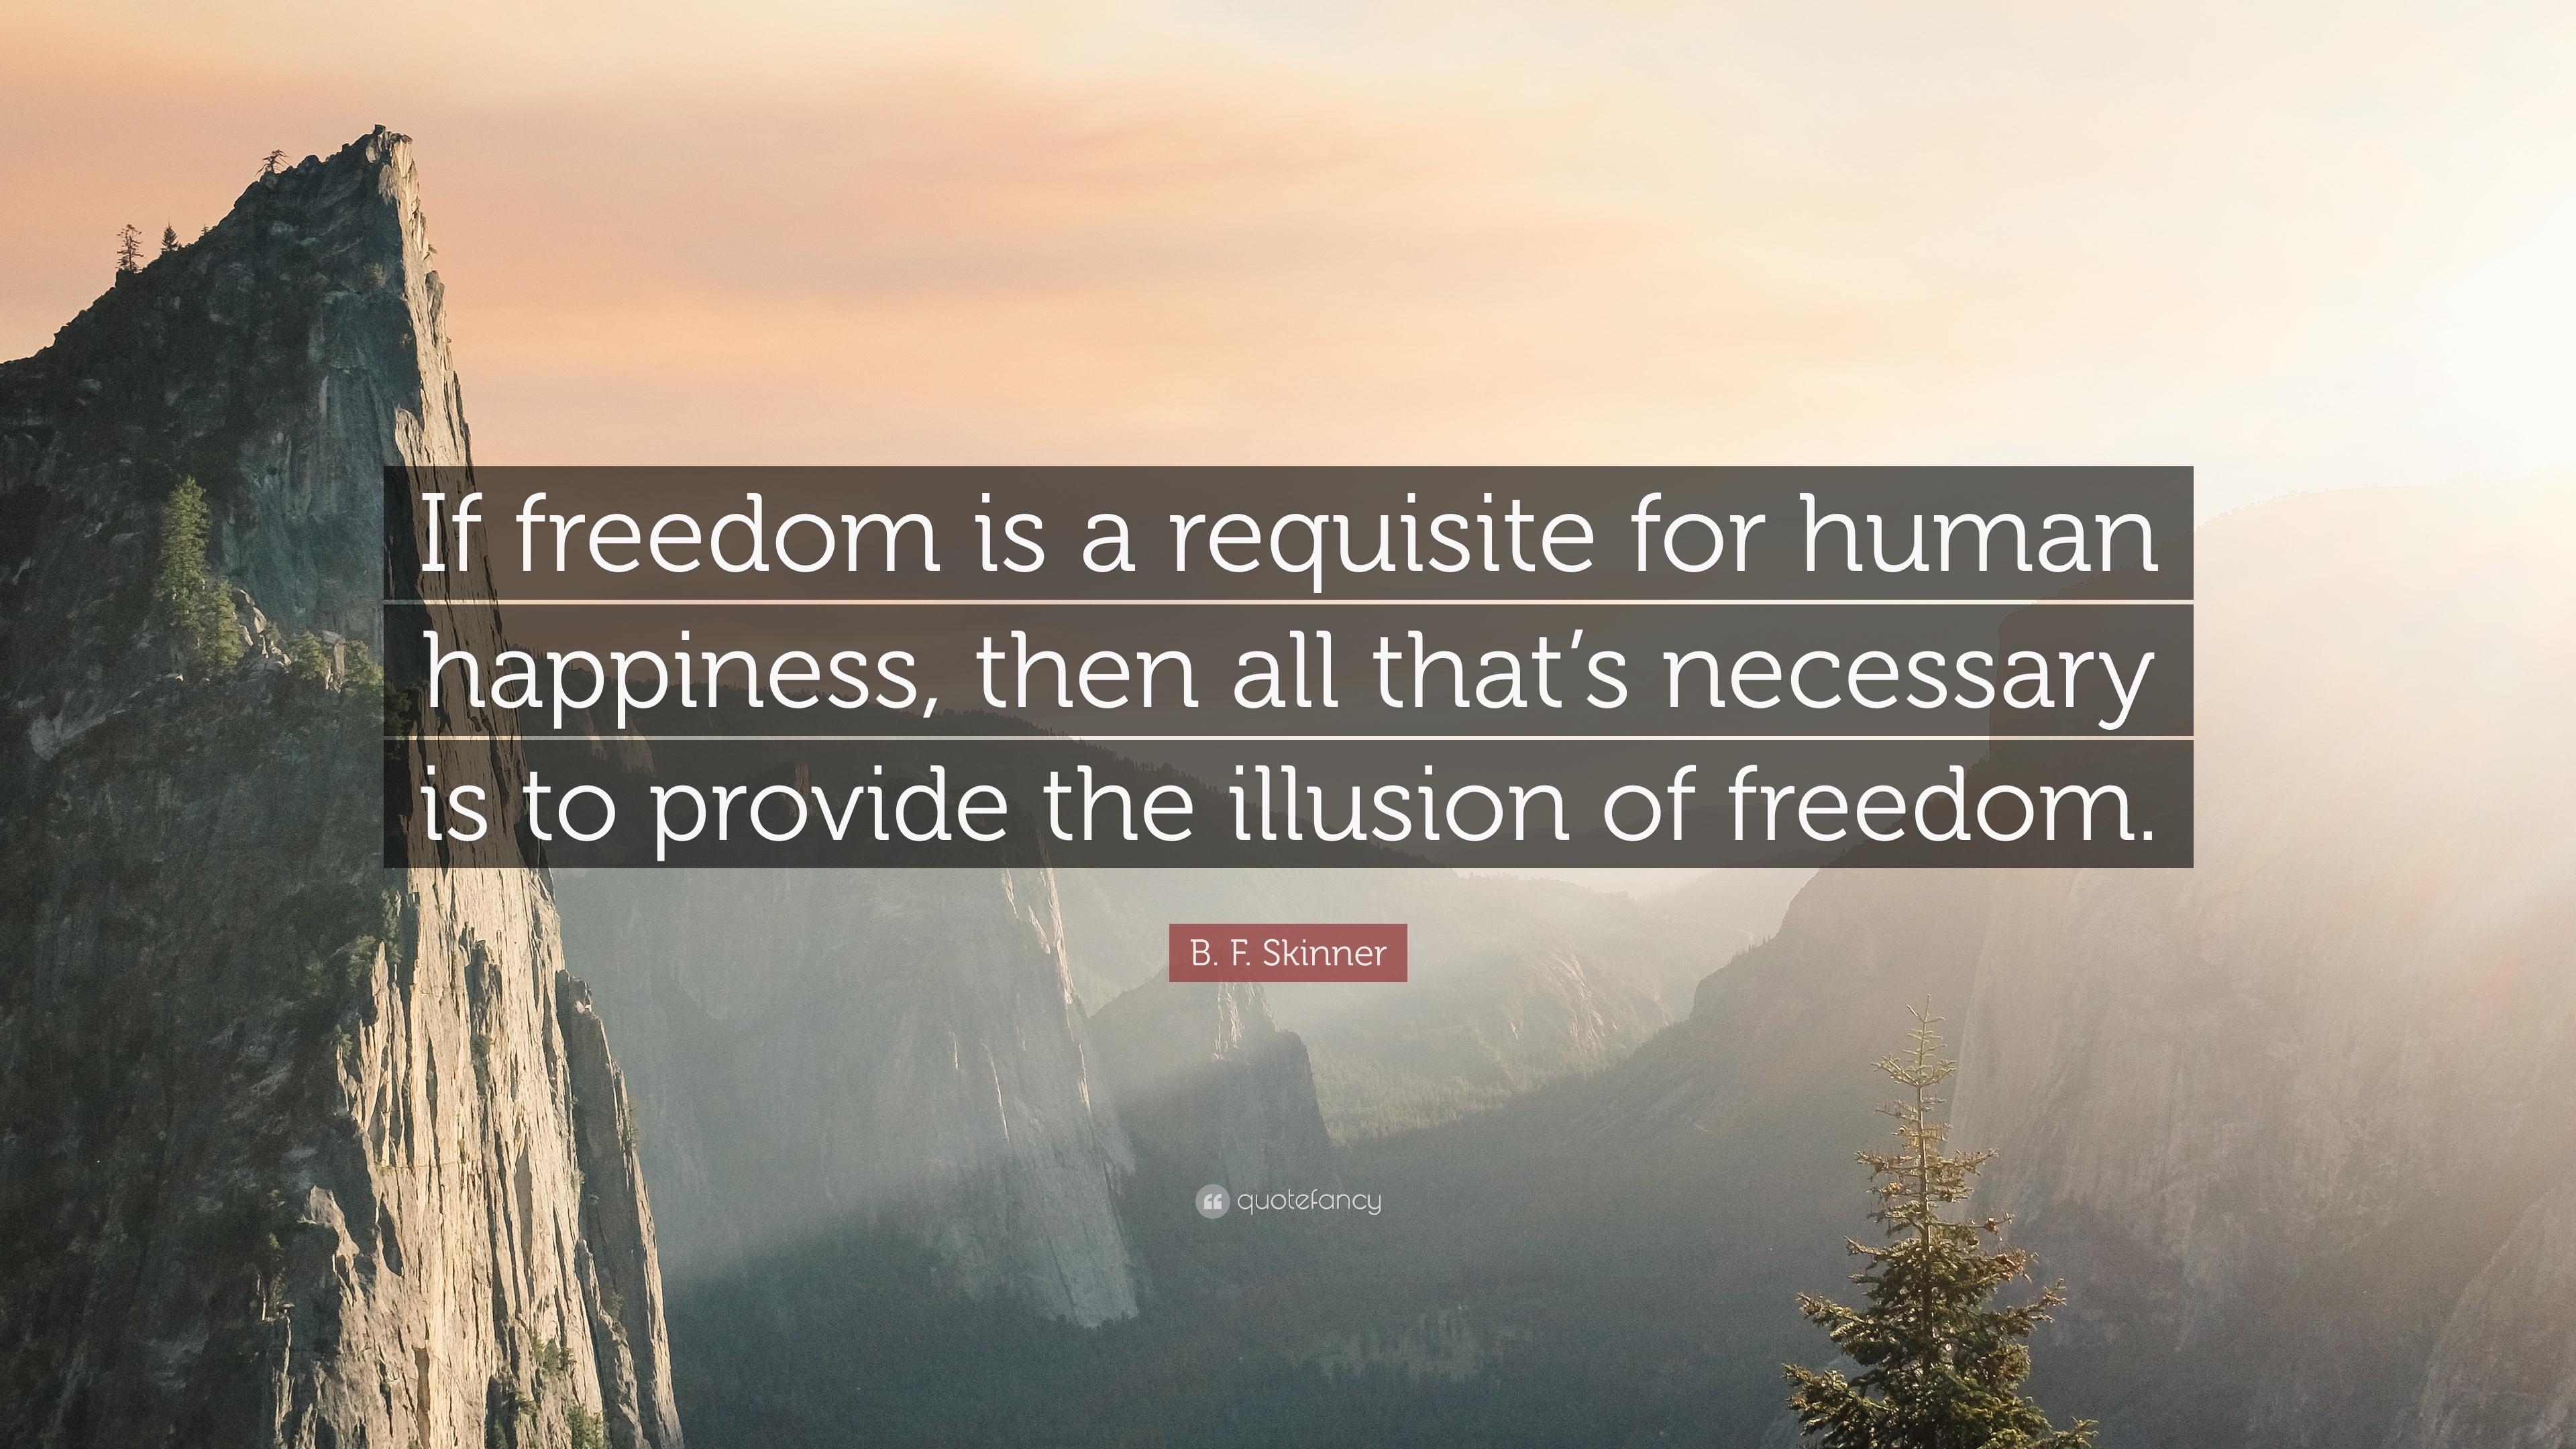 B. F. Skinner Quote: “If freedom is a requisite for human